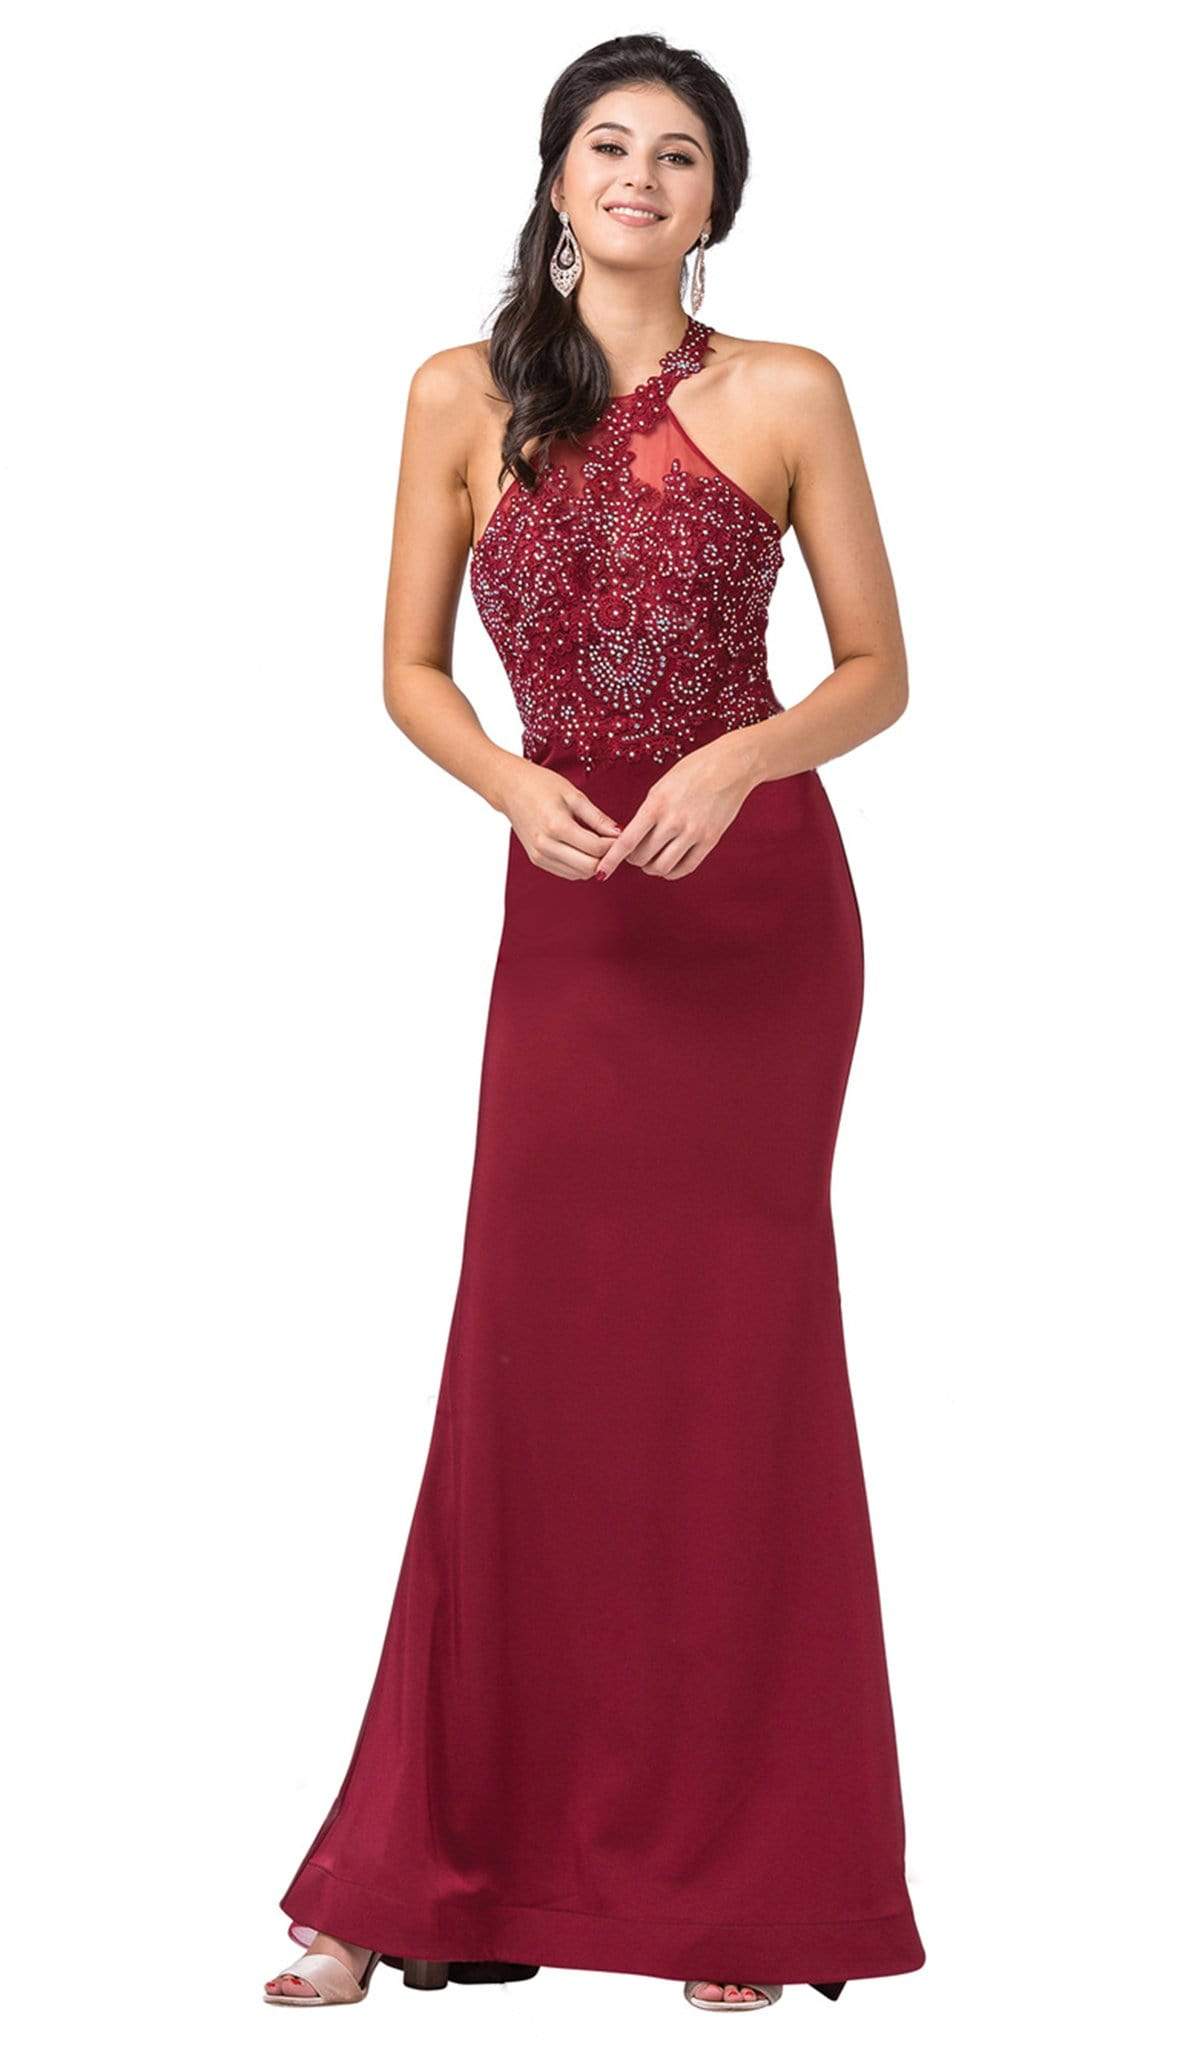 Image of Dancing Queen - 2499 Appliqued Illusion Back Paneled Long Gown